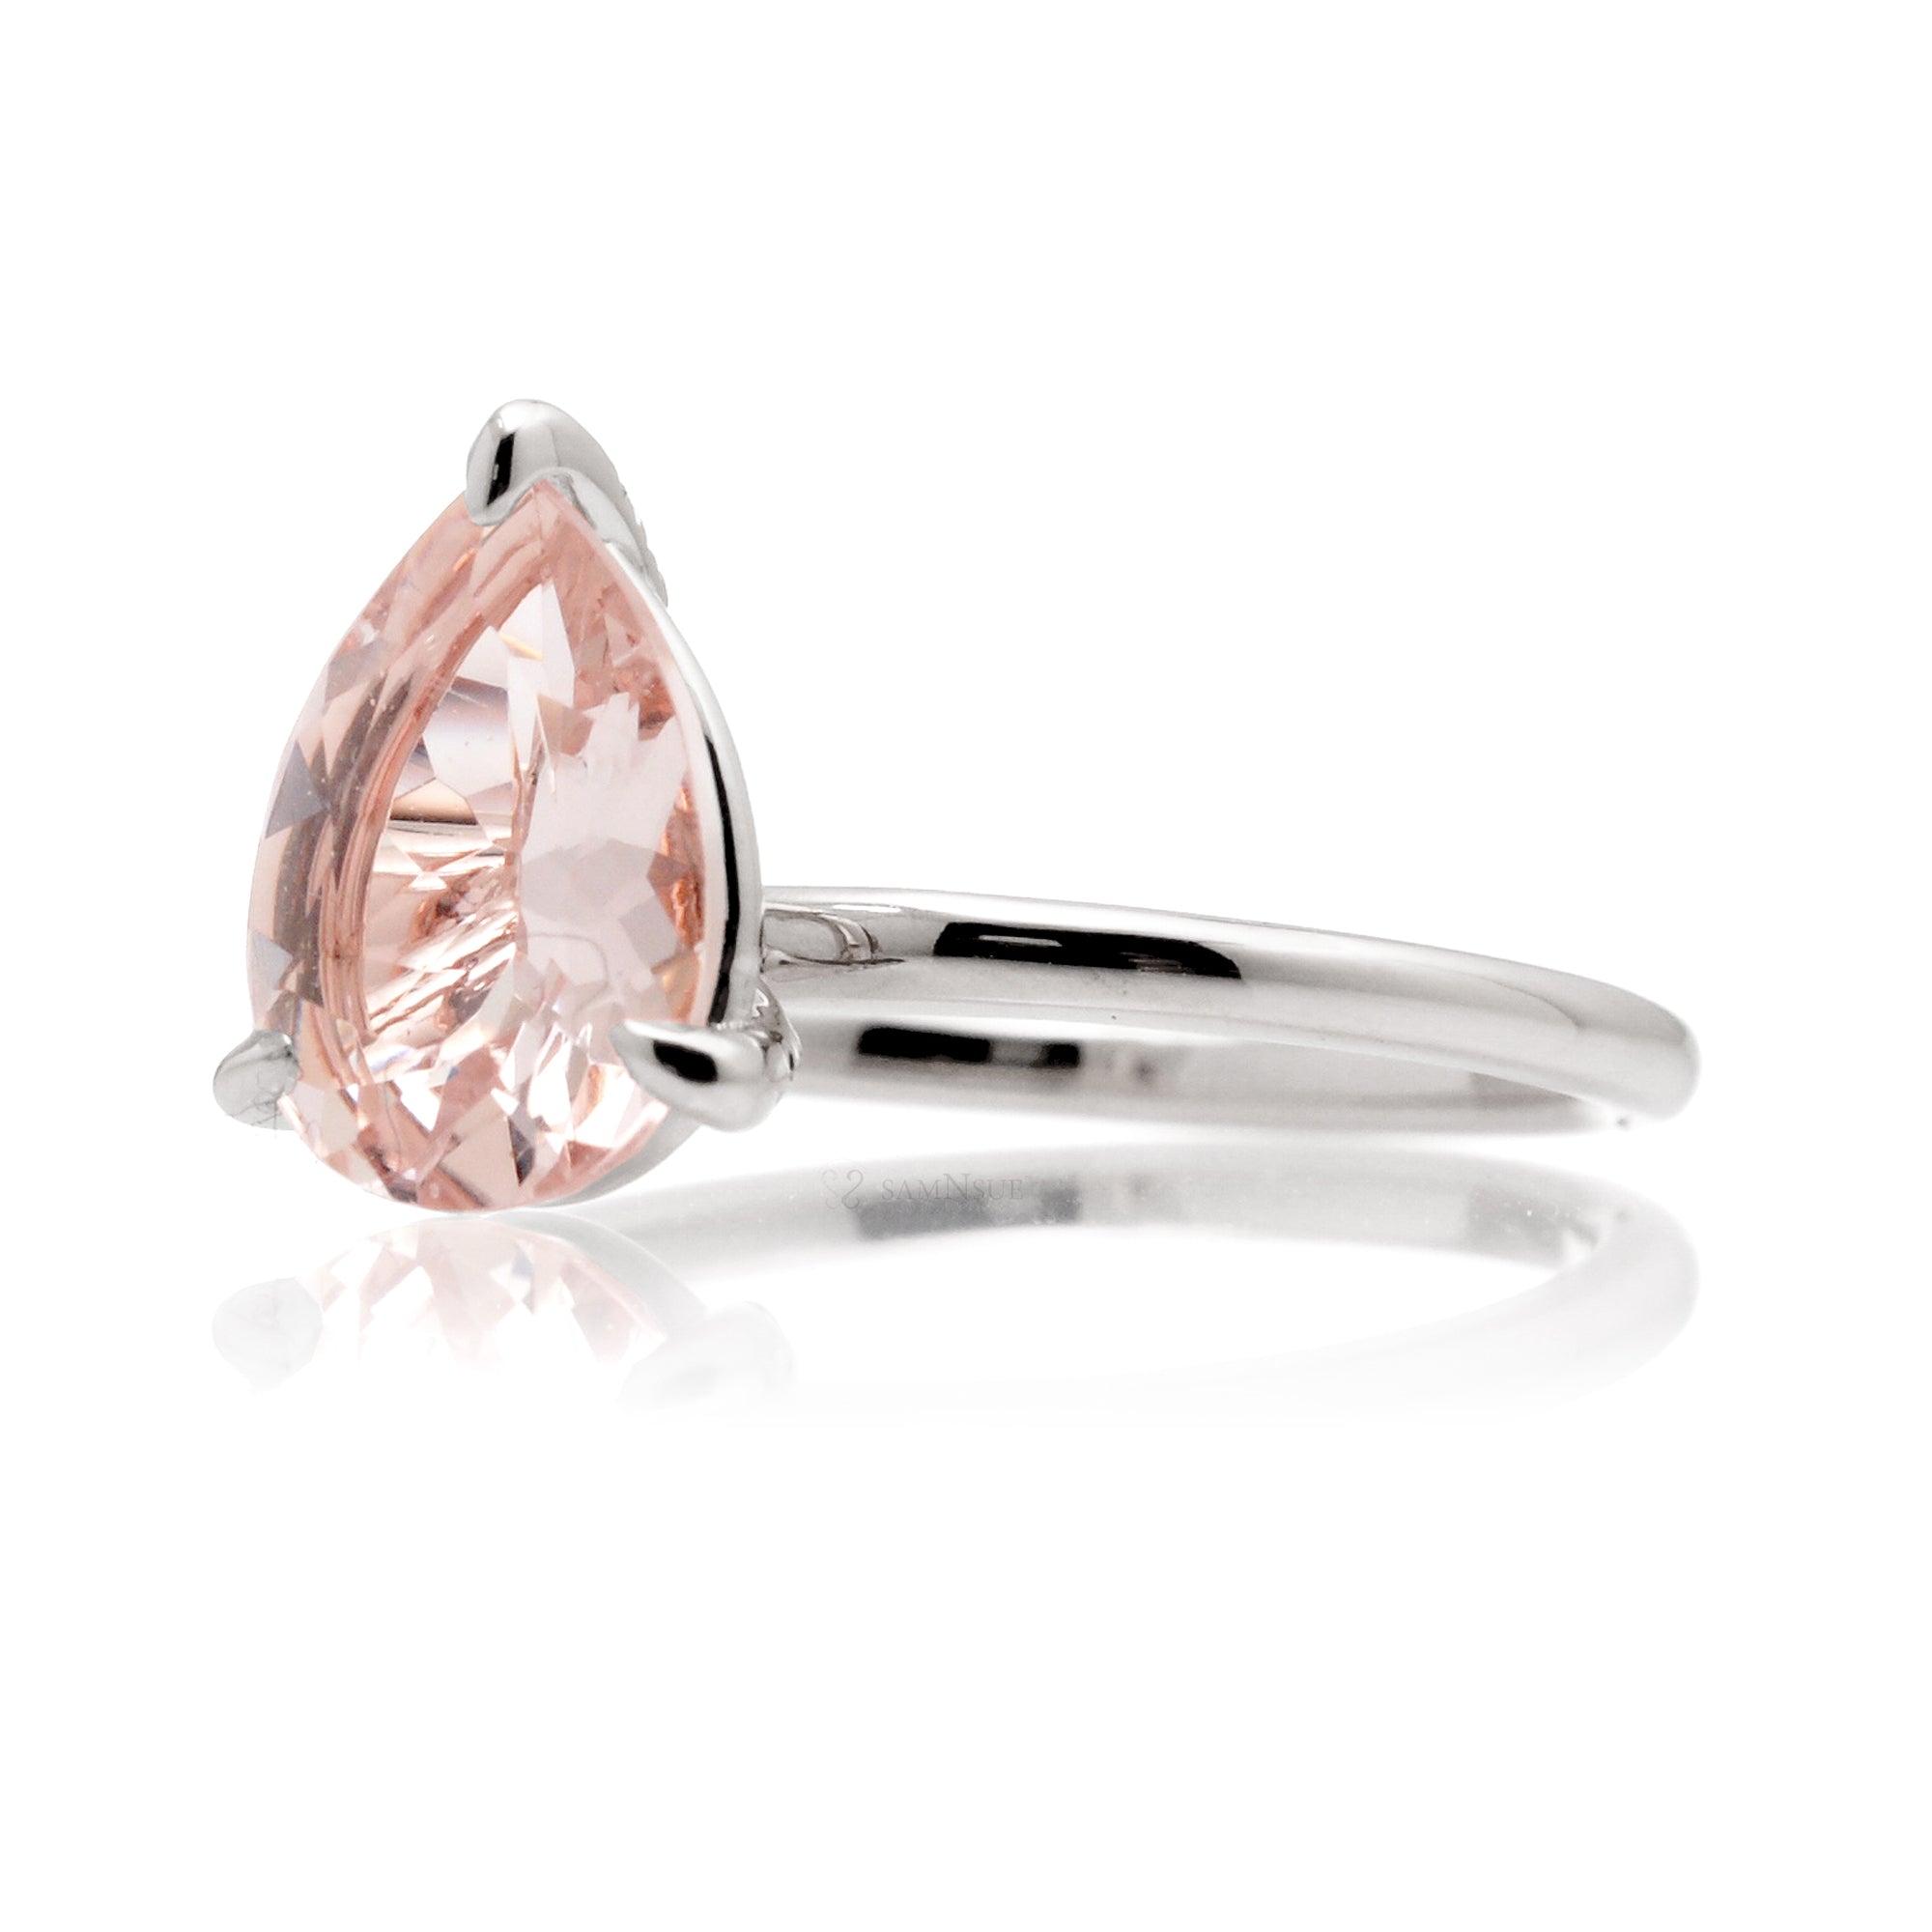 Pear morganite solid band engagement ring white gold - The Ava